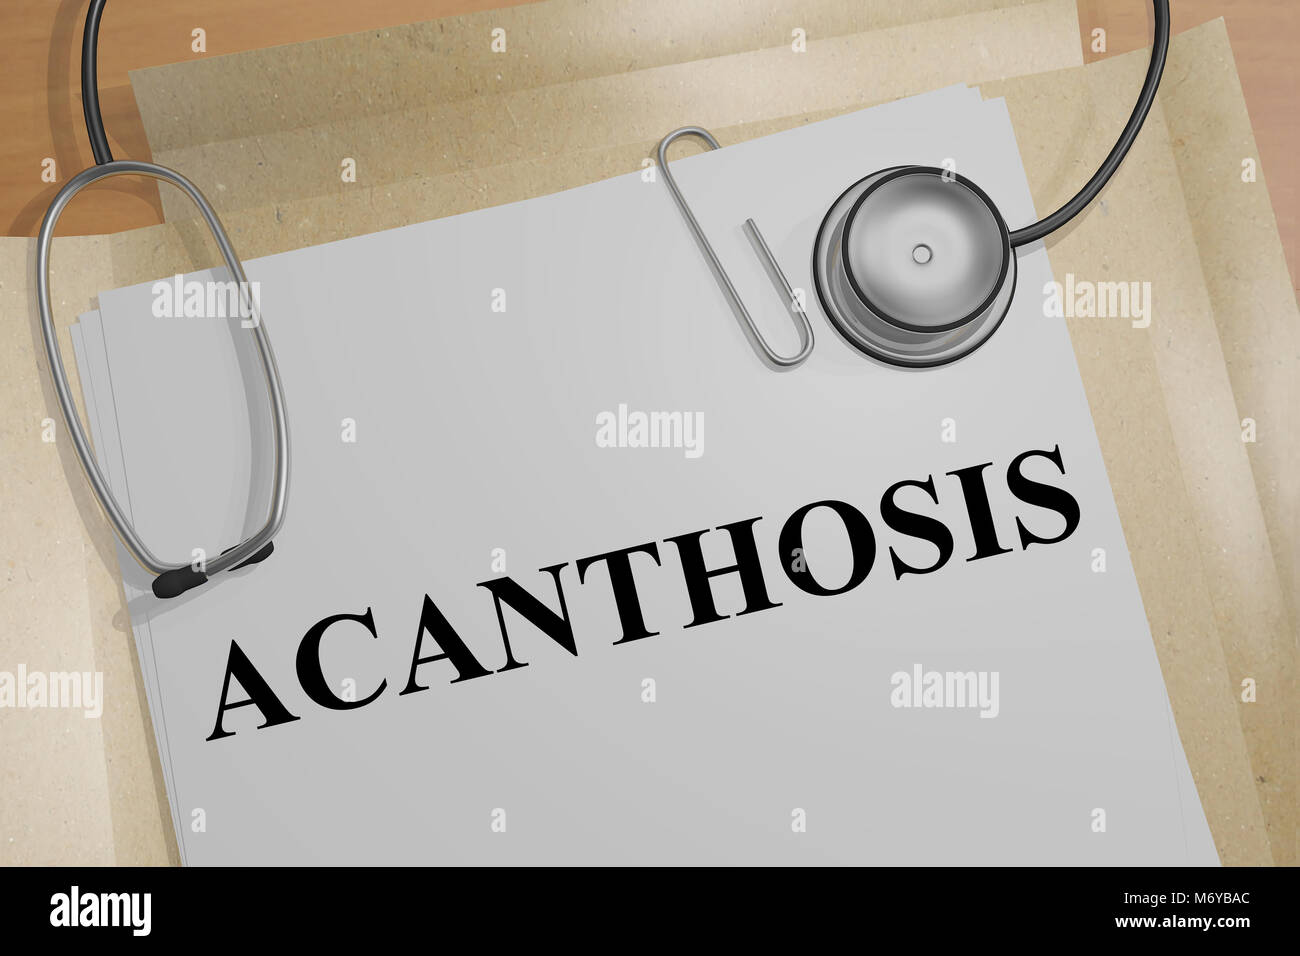 3D illustration of ACANTHOSIS title on a medical document Stock Photo